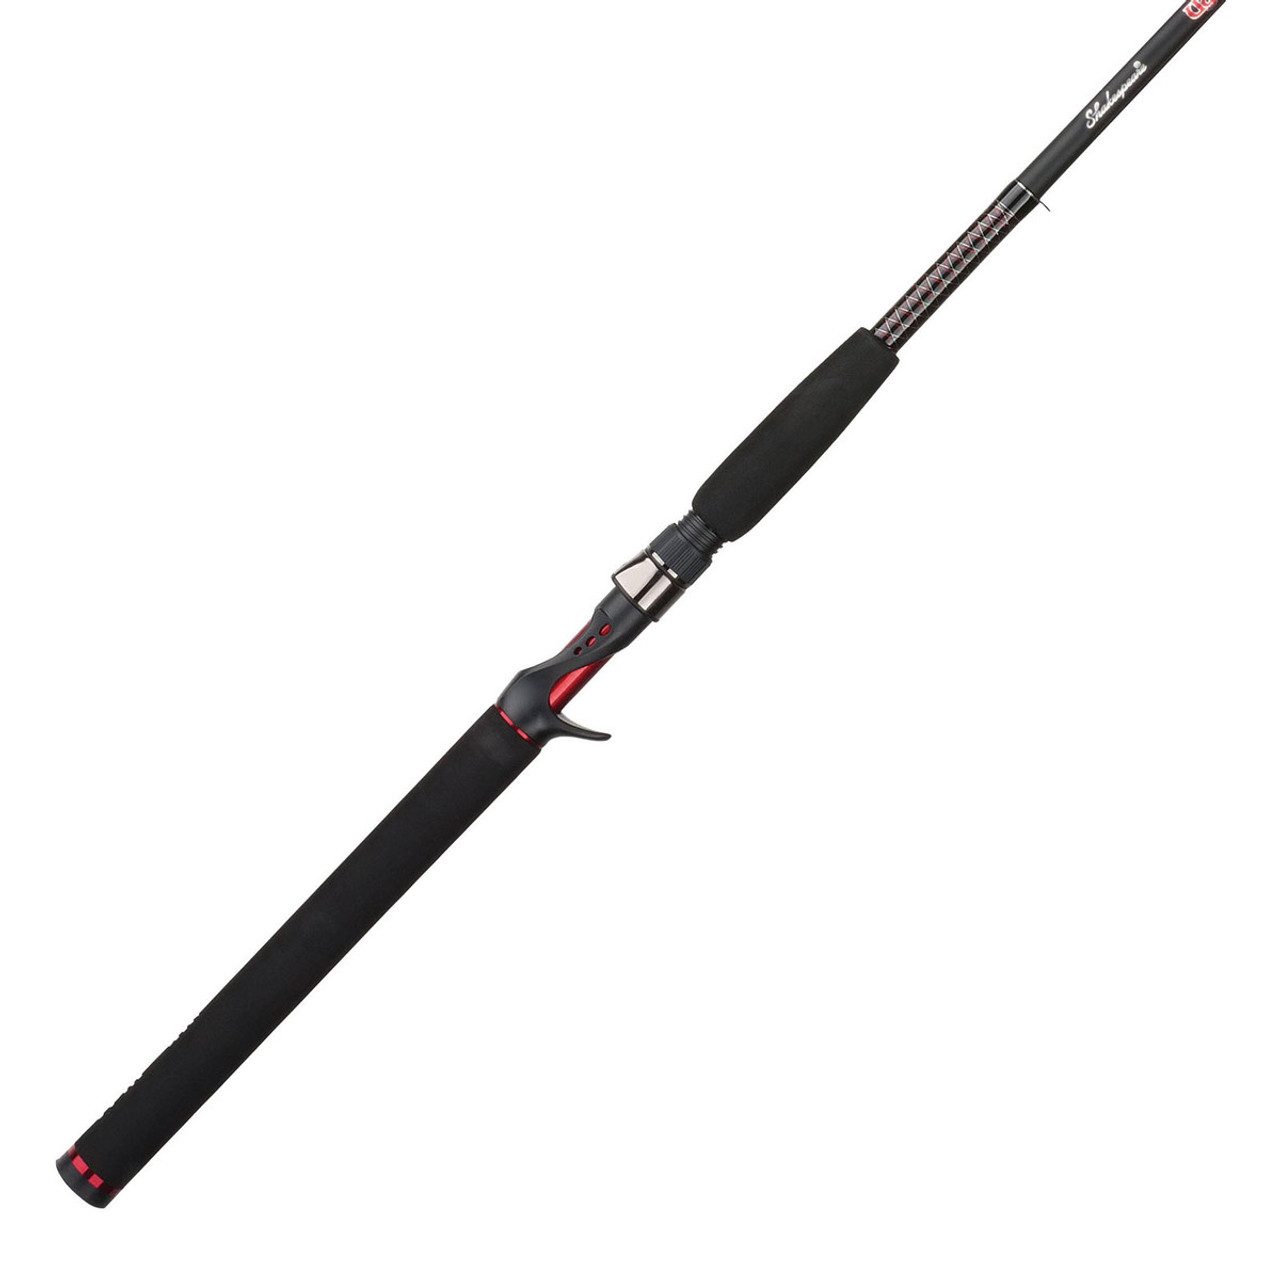 Ugly Stik on Instagram: For the angler demanding durability, you